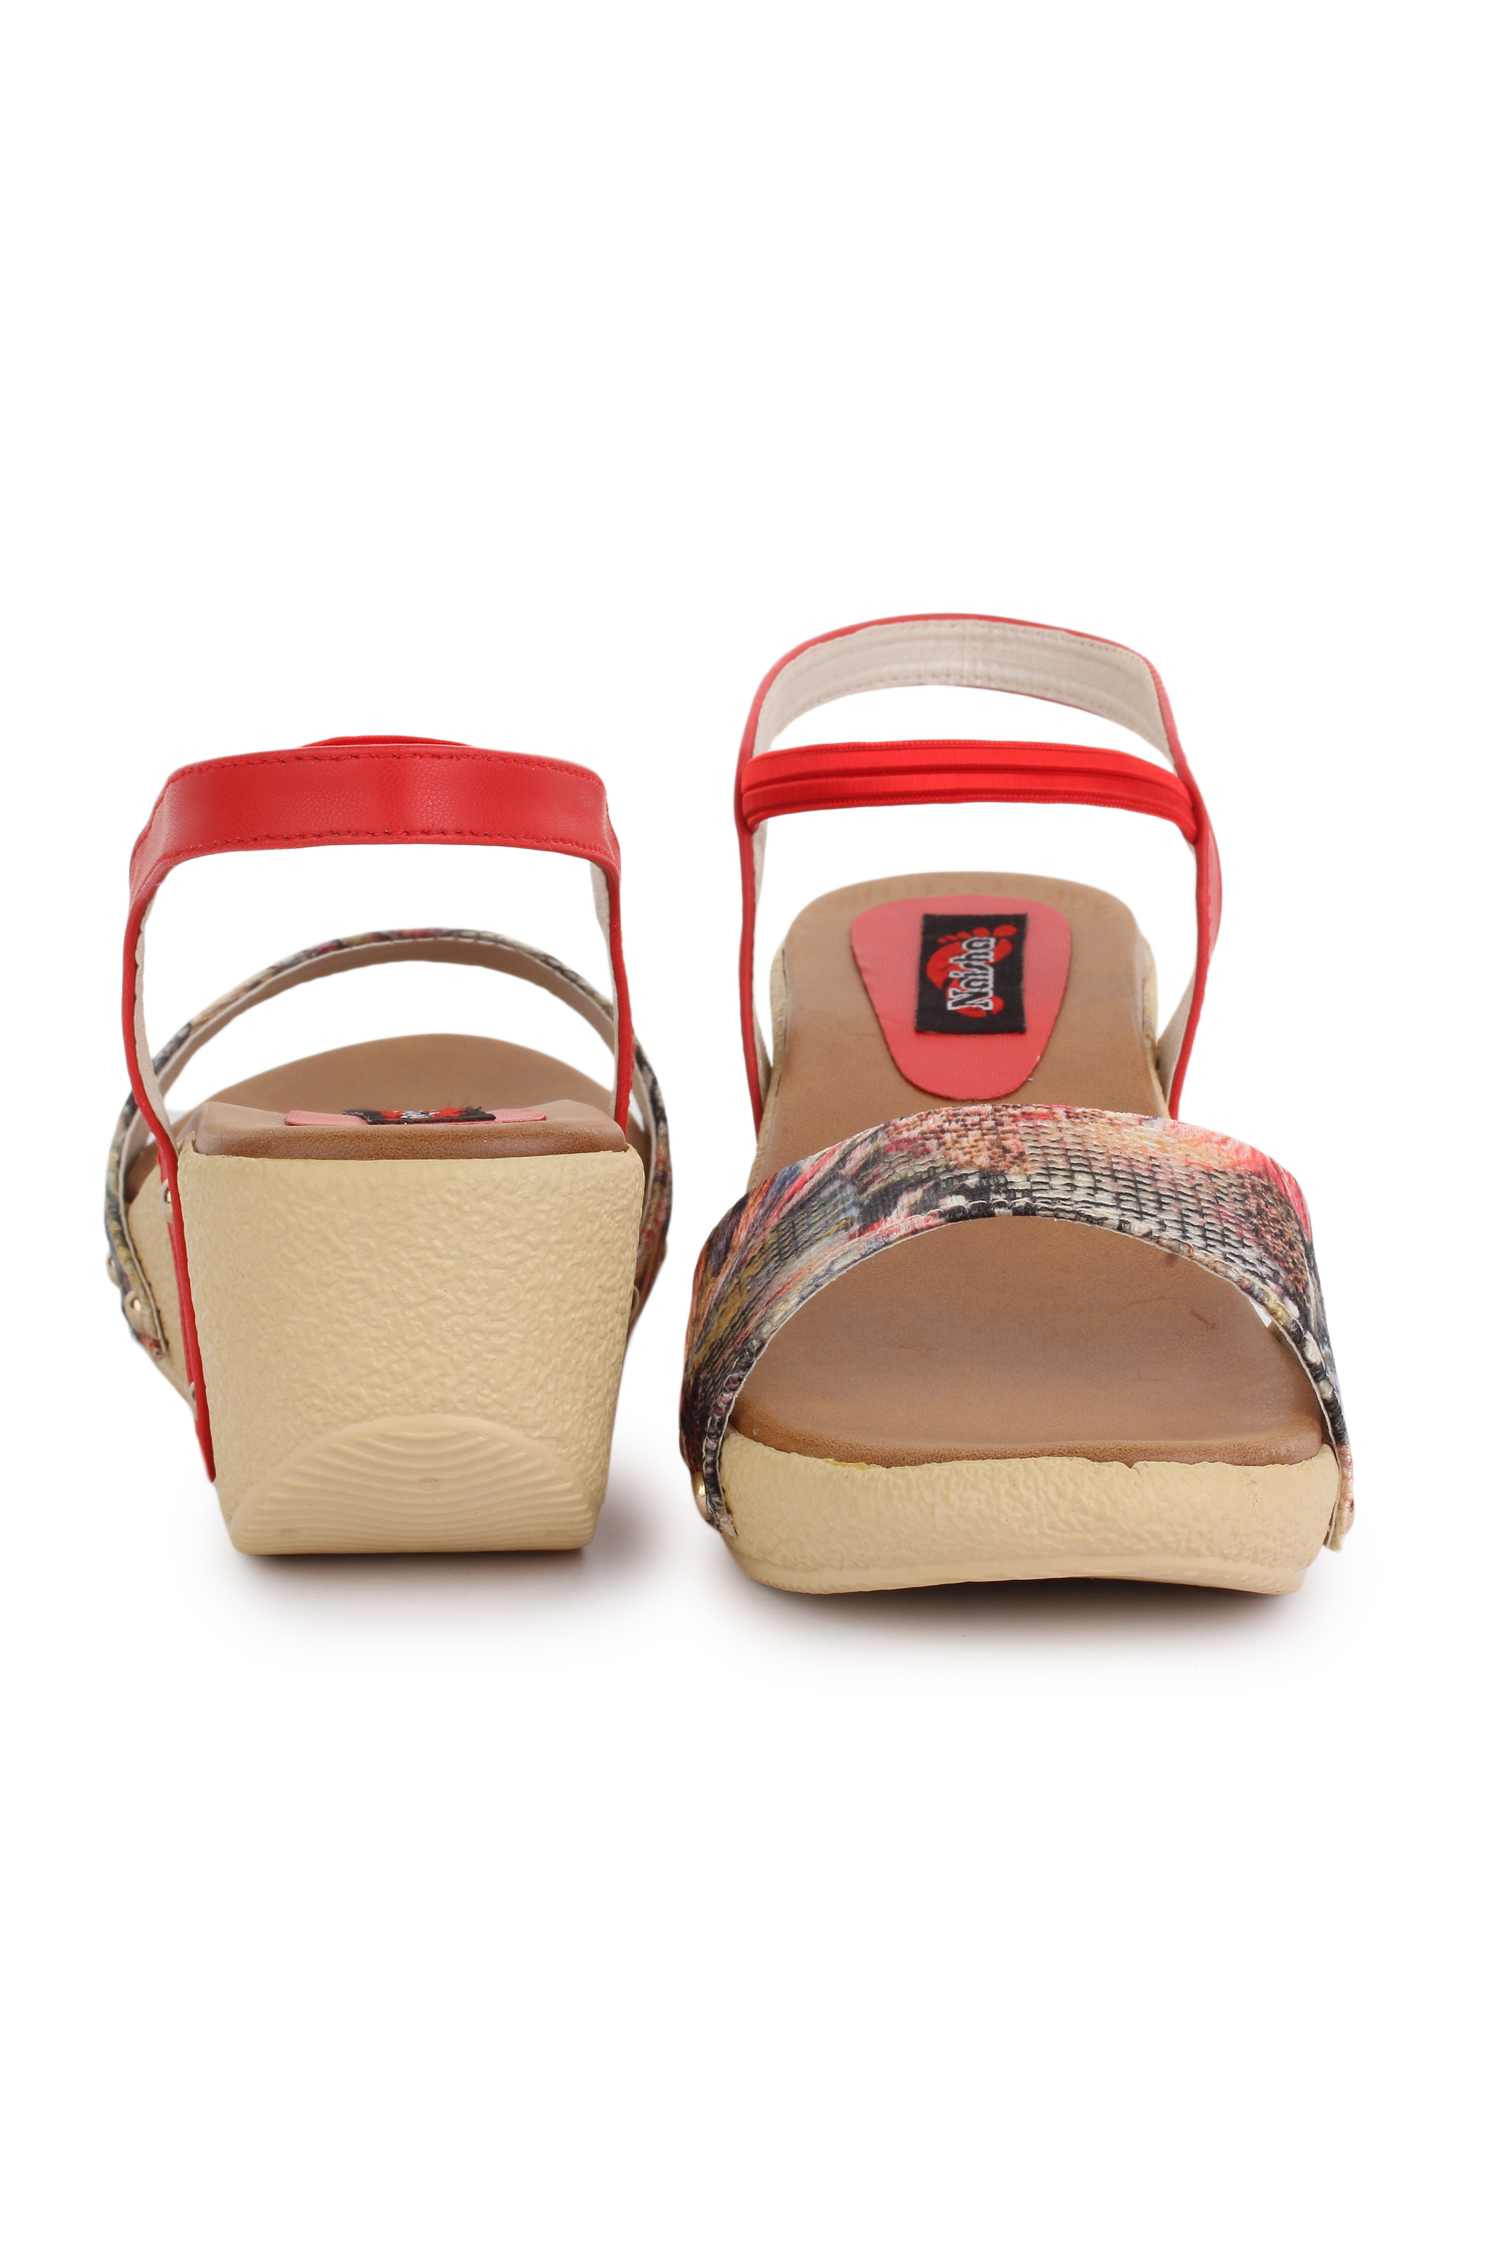 Buy Naisha Women's Red Wedges Online @ ₹1299 from ShopClues